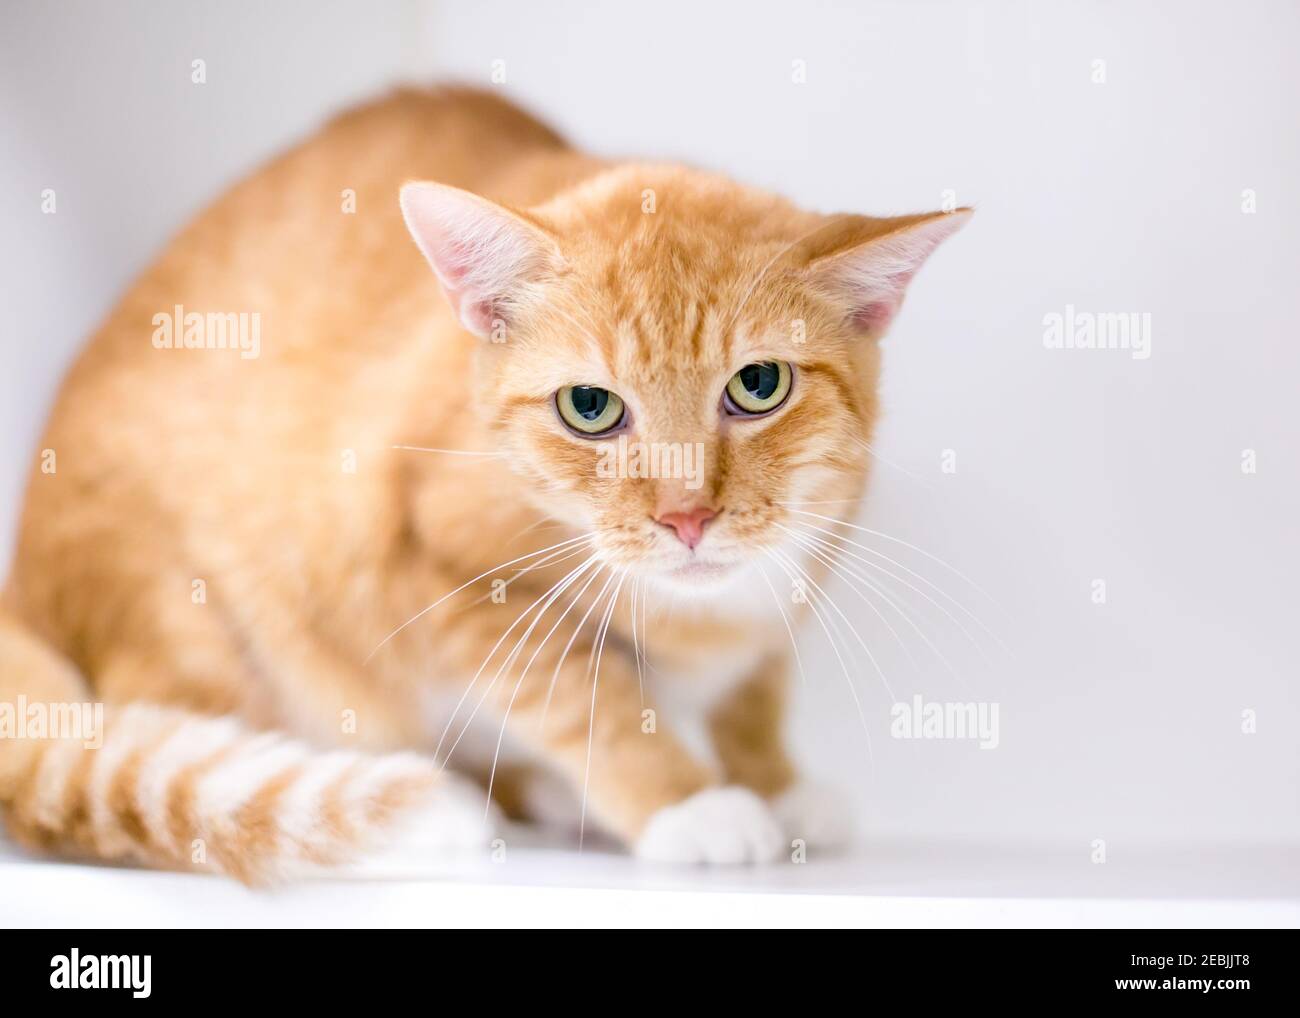 An orange tabby shorthair cat displaying tense body language, crouching and staring at the camera with dilated pupils and a grumpy expression Stock Photo